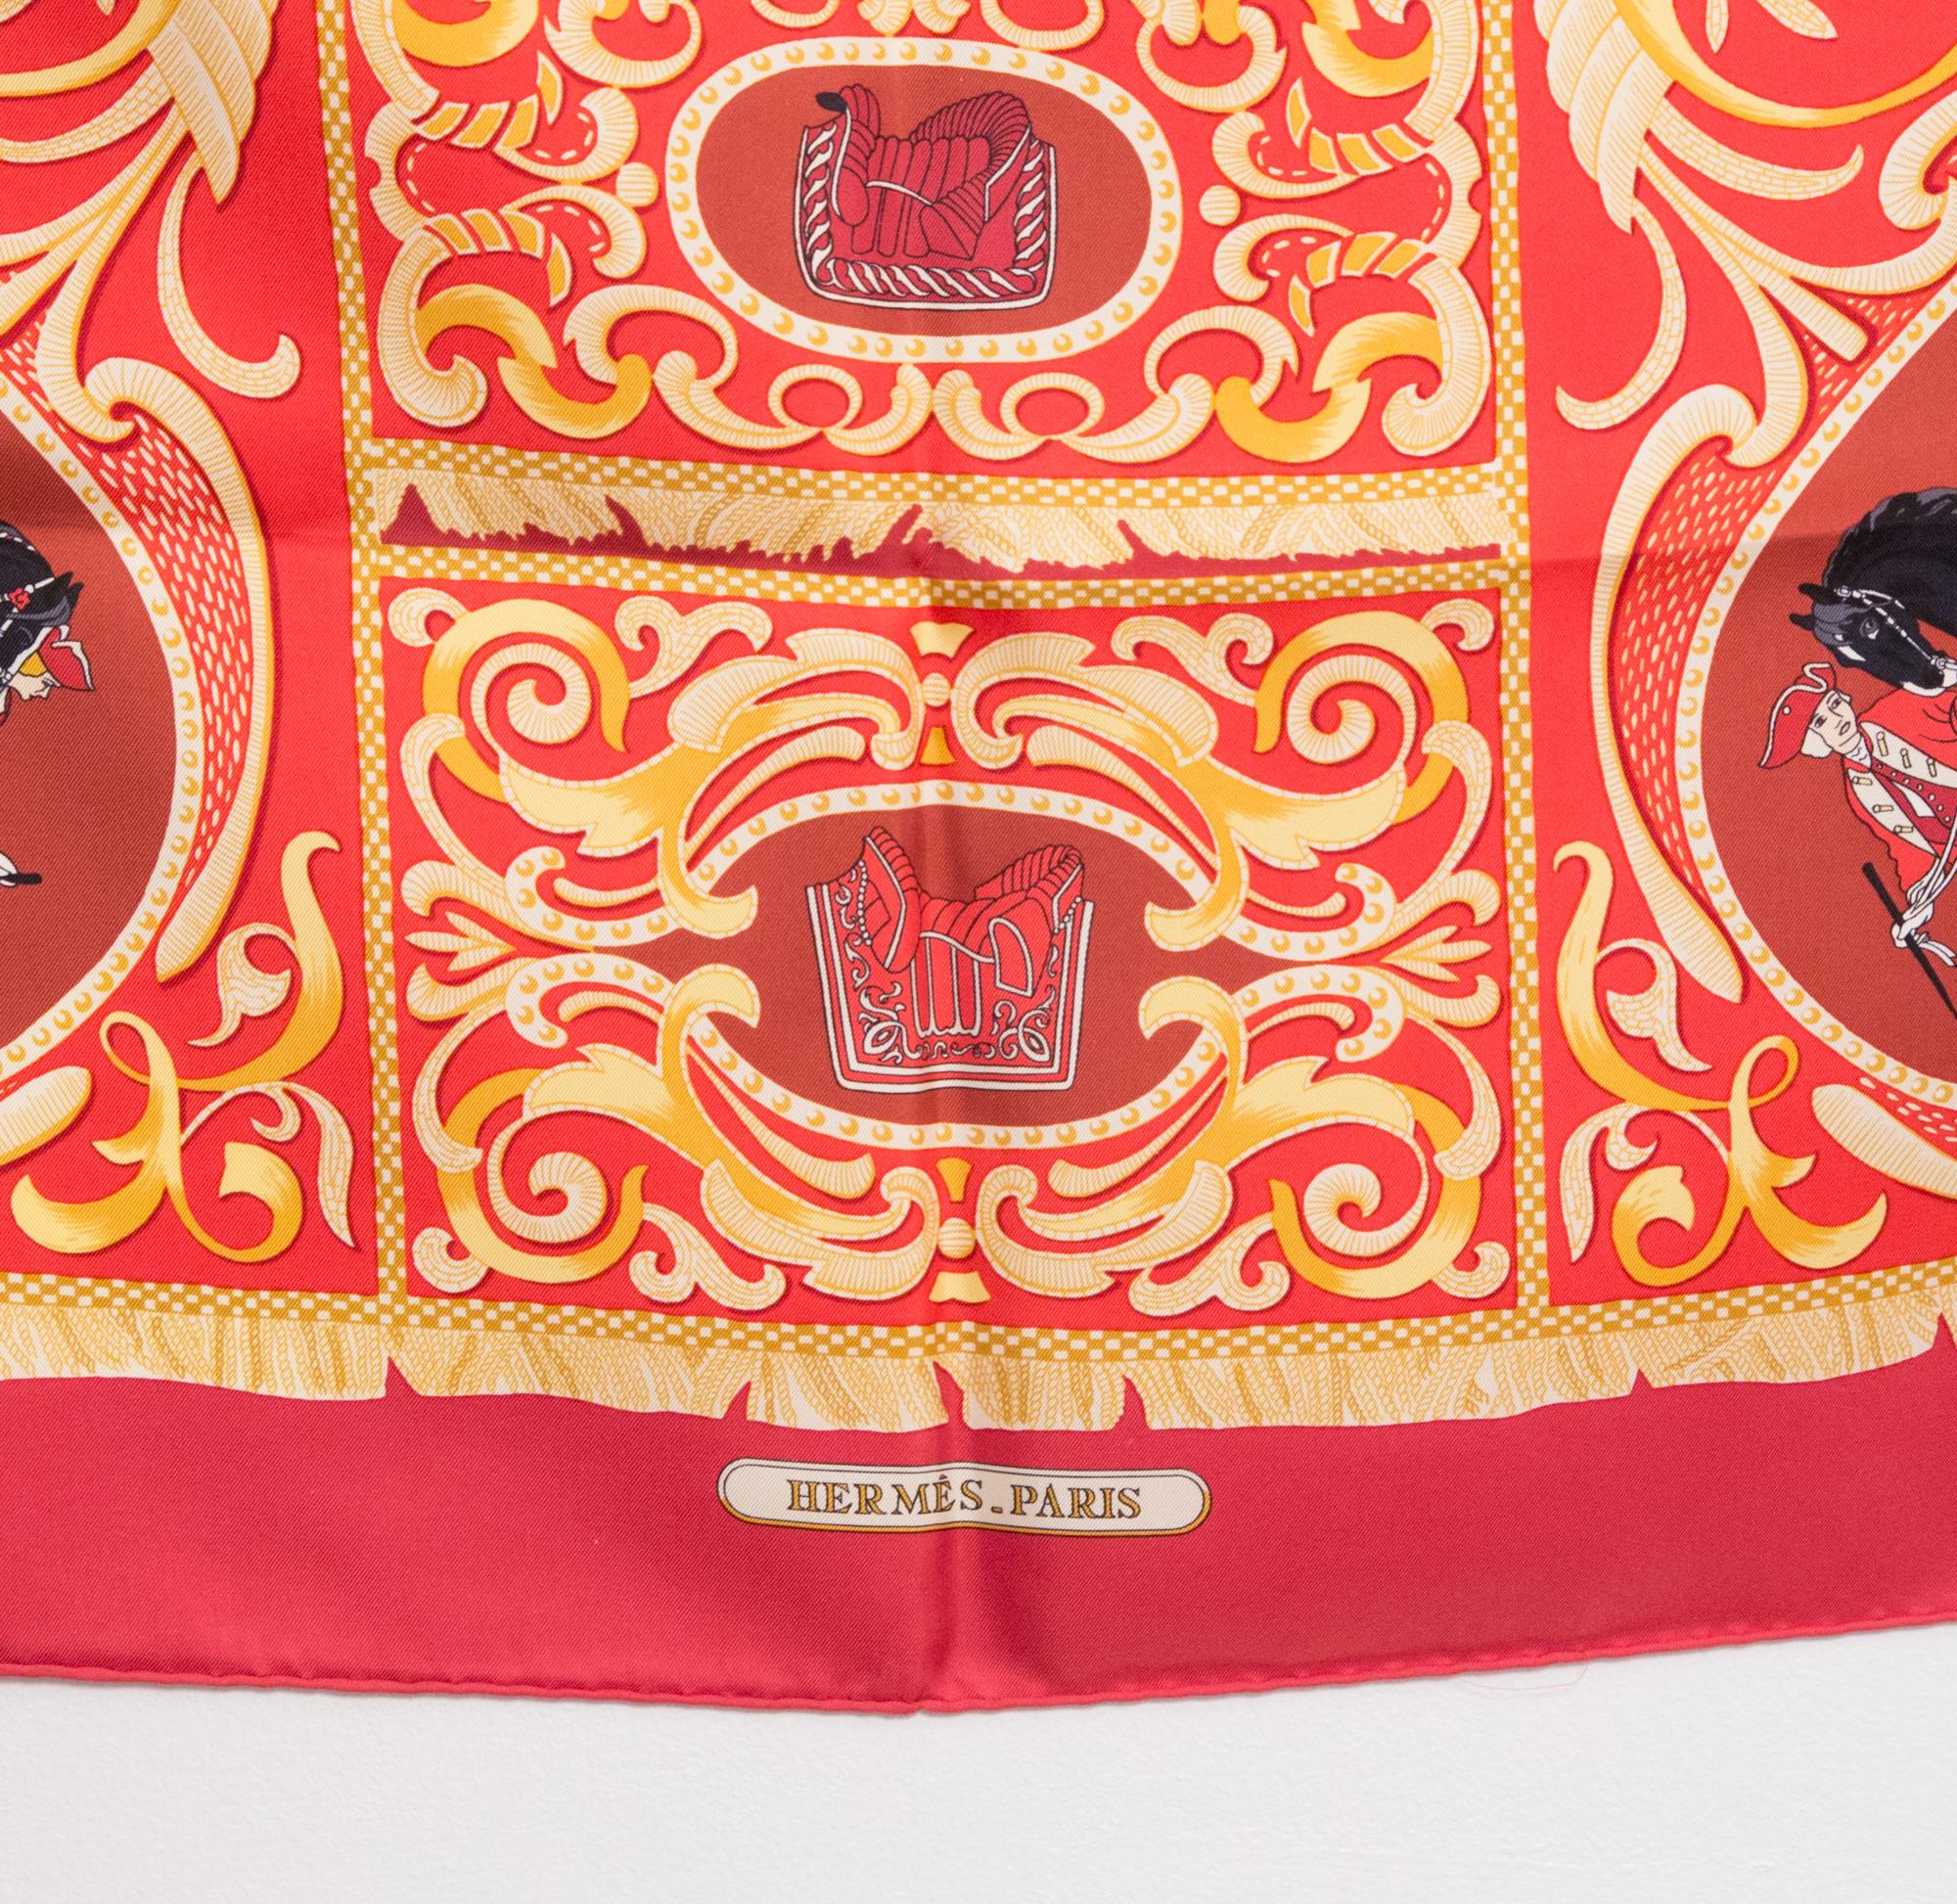 Hermes silk scarf La Presentation by Christiane Vauzelles featuring a red border.
In good vintage condition. Made in France.
35,4in. (90cm)  X 35,4in. (90cm)
We guarantee you will receive this  iconic item as described and showed on photos.
(please